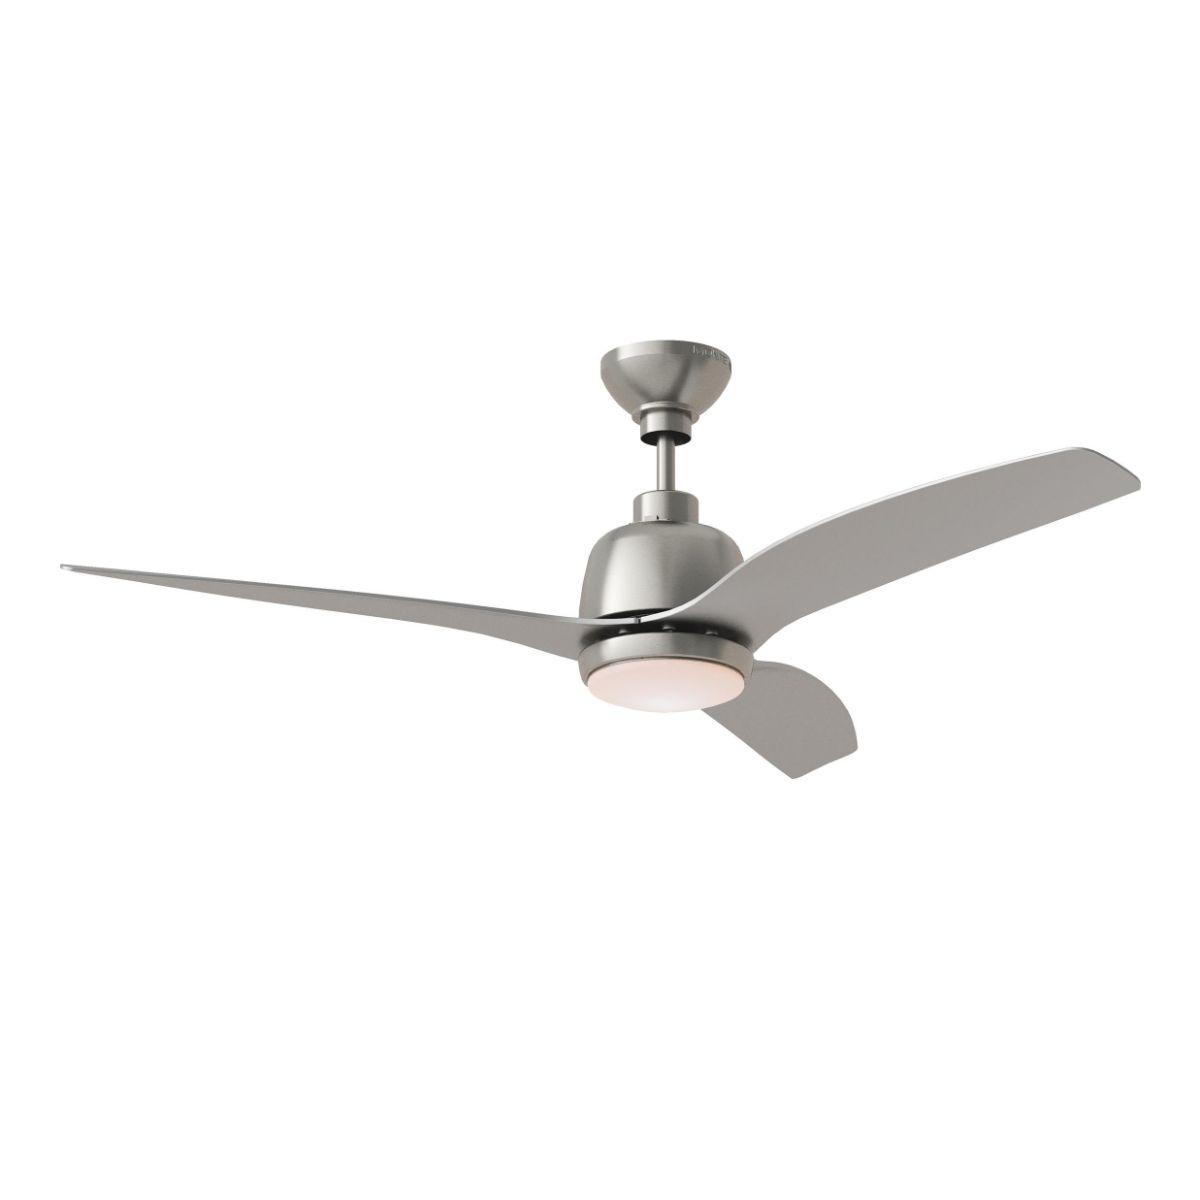 Avila 54 Inch Modern Outdoor Ceiling Fan With Light And Remote